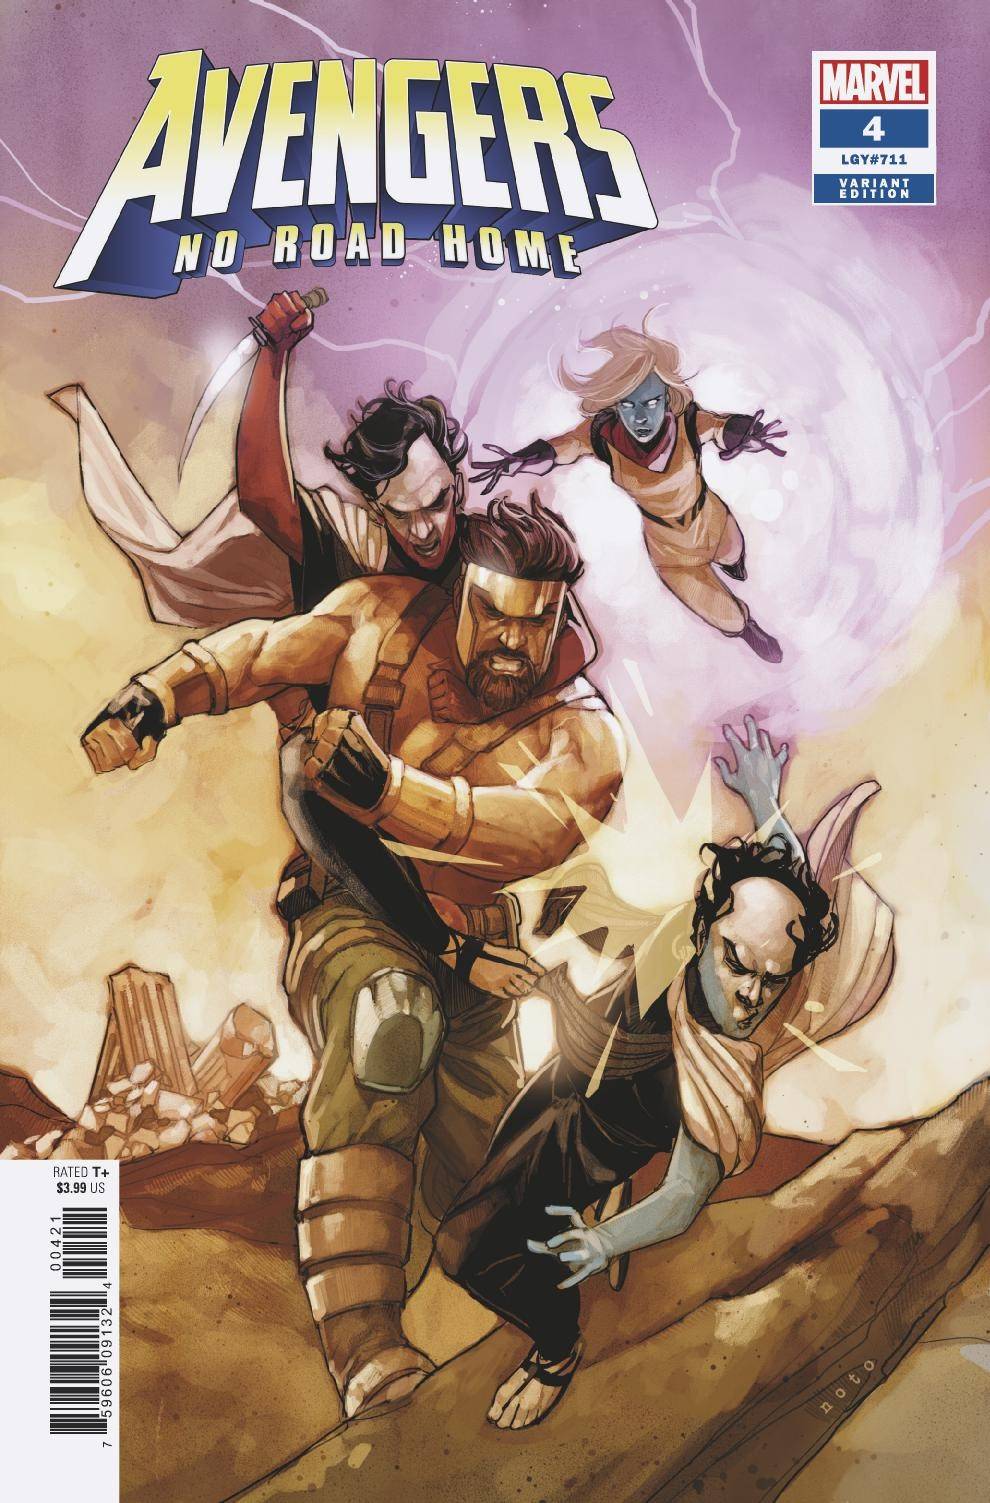 AVENGERS NO ROAD HOME #4 (OF 10) 03/06/19